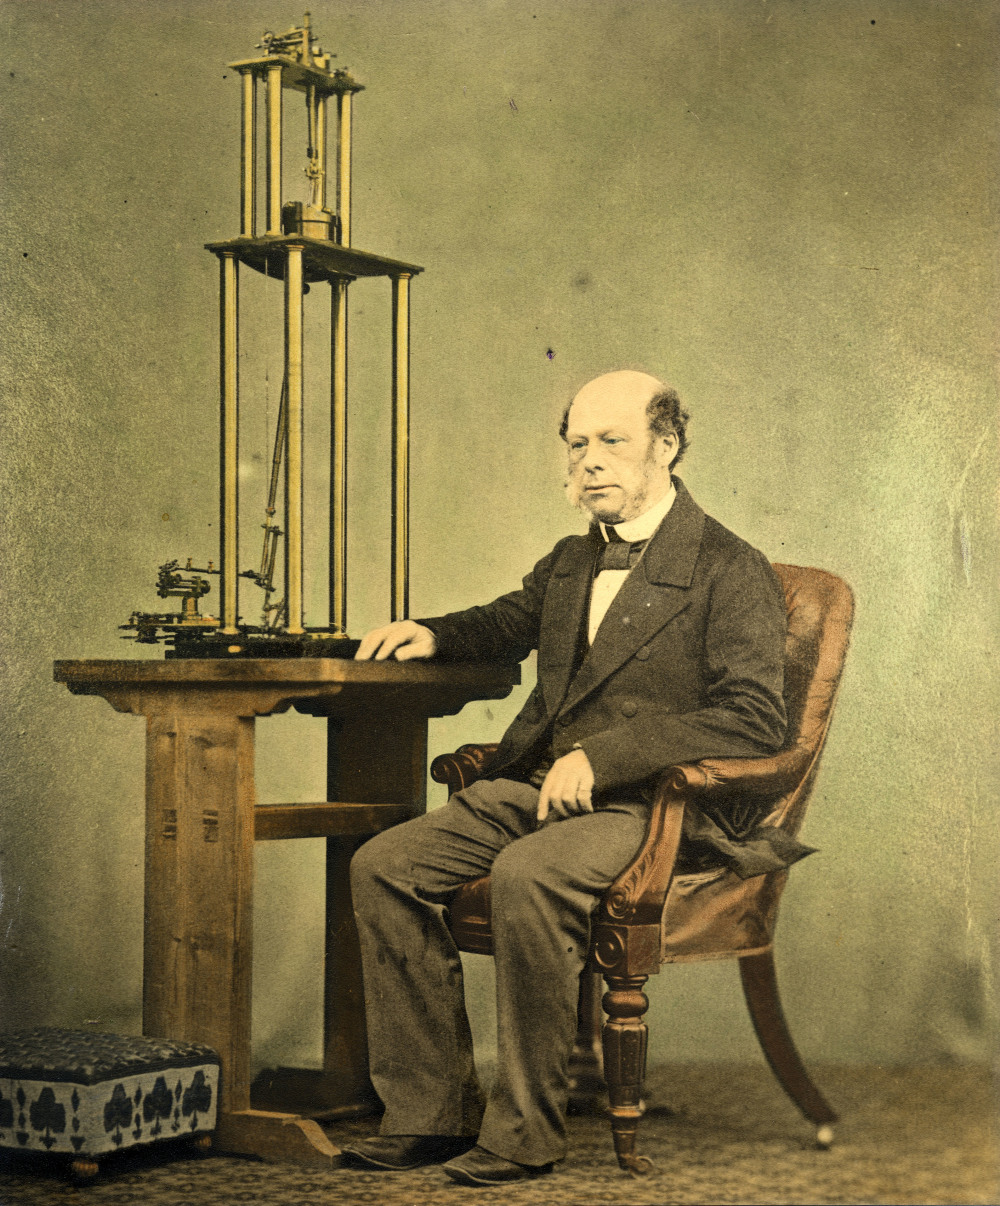 preview image for Photograph (Gelatine Print, Hand-Coloured) of R. J. Farrants and the Peters Machine, Late 19th Century